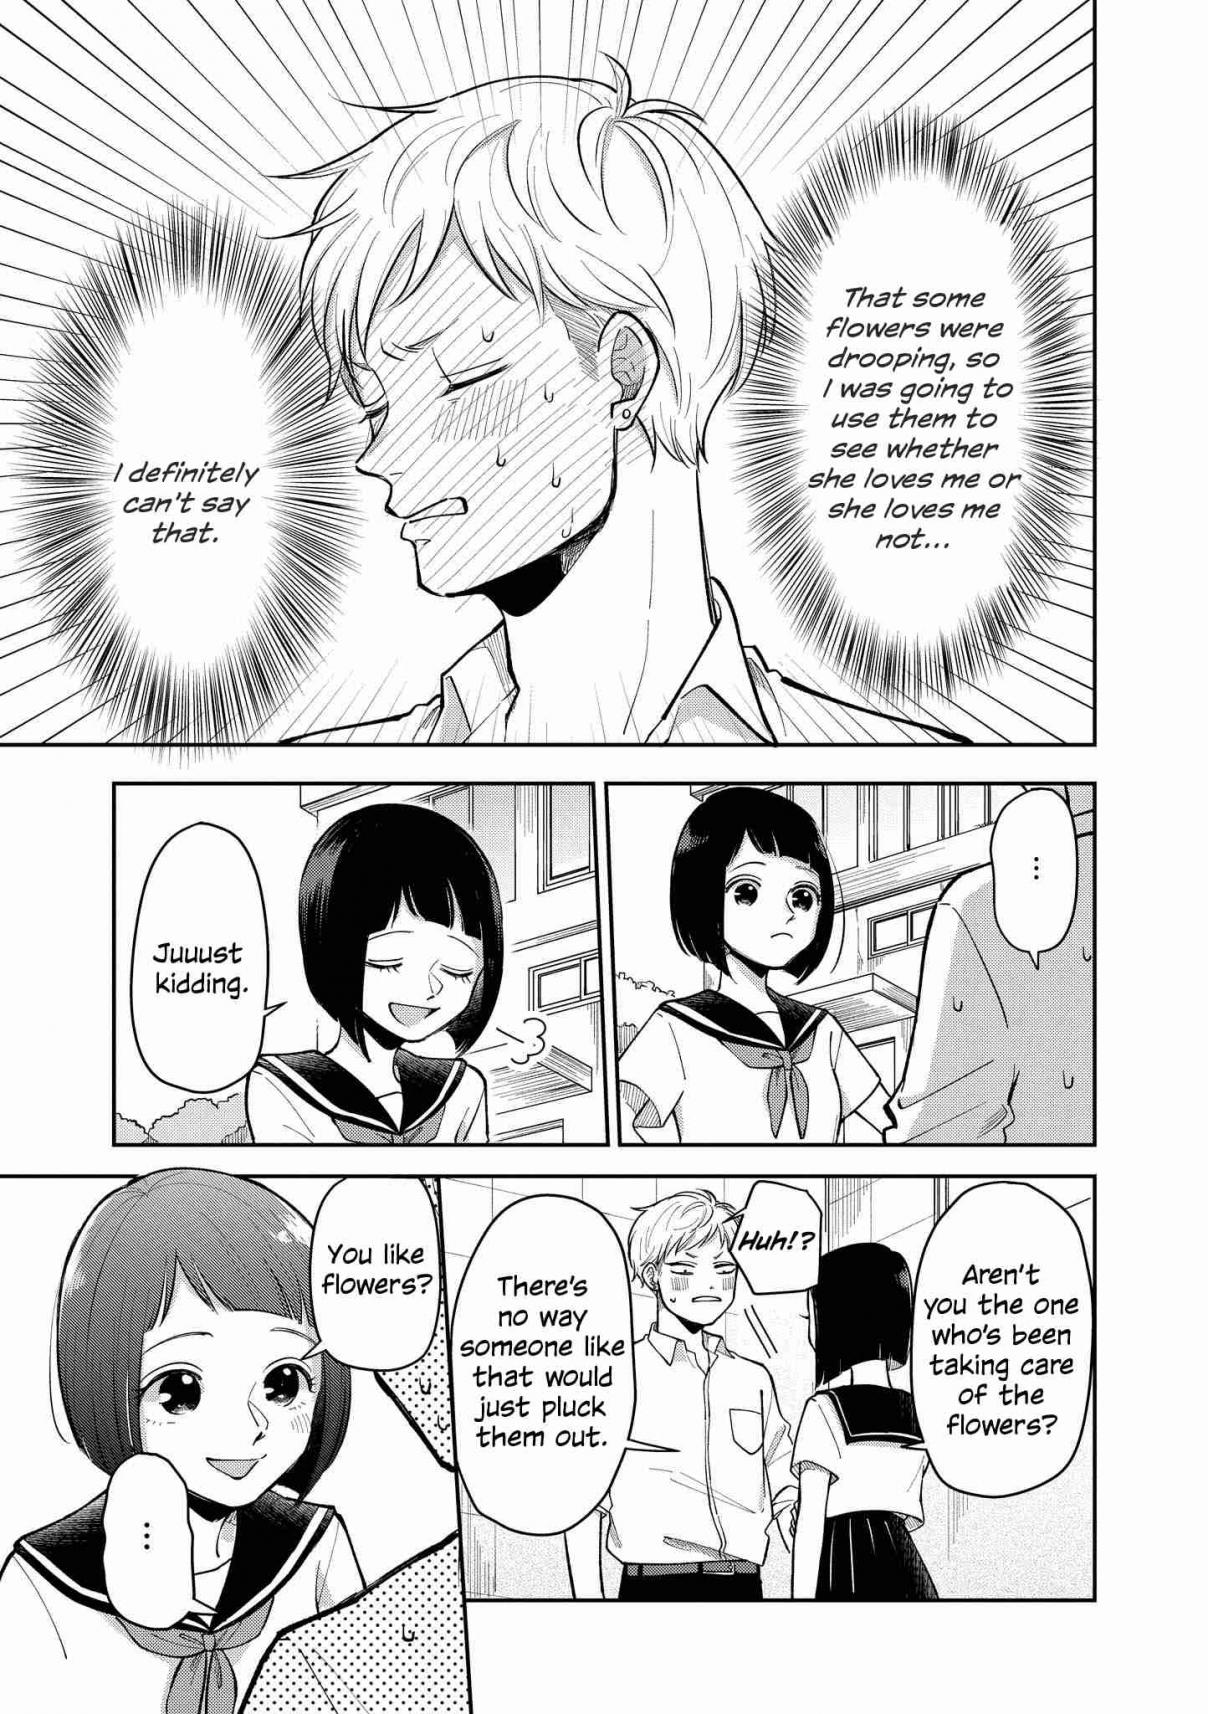 “It’s Too Precious and Hard to Read!!” 4P Short Stories Vol. 1 Ch. 16 Definitely can't say [by Suzuyuki]